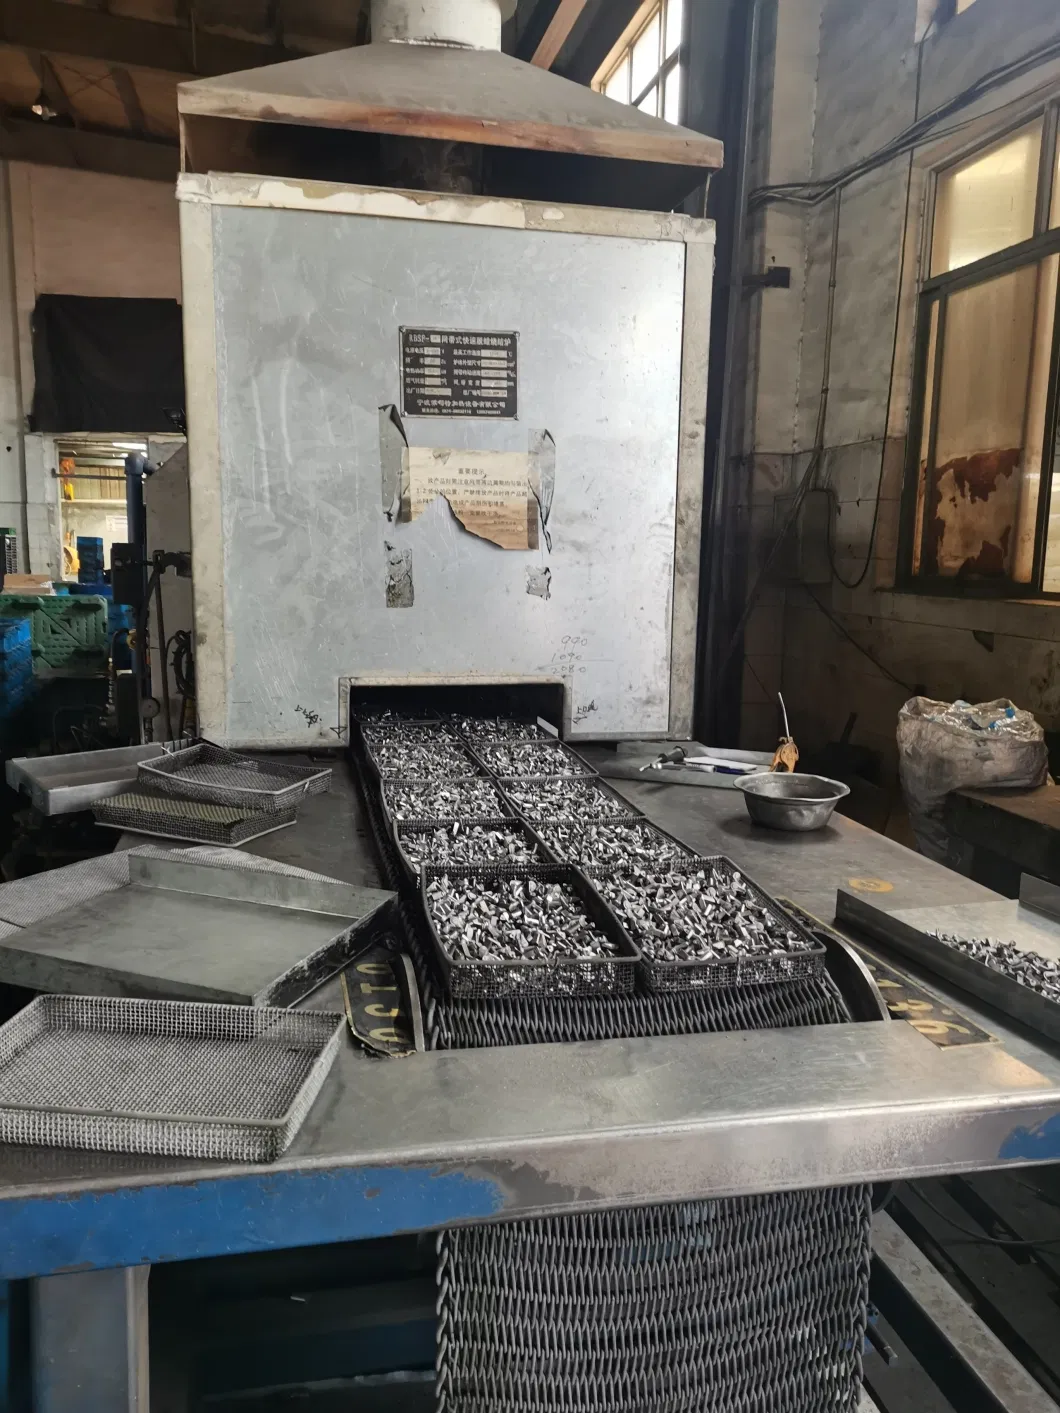 Heat Resistant Metal Stainless Steel Double Spiral Wire Oven Transport Band Woven Mesh Conveyor Belt for Annealing